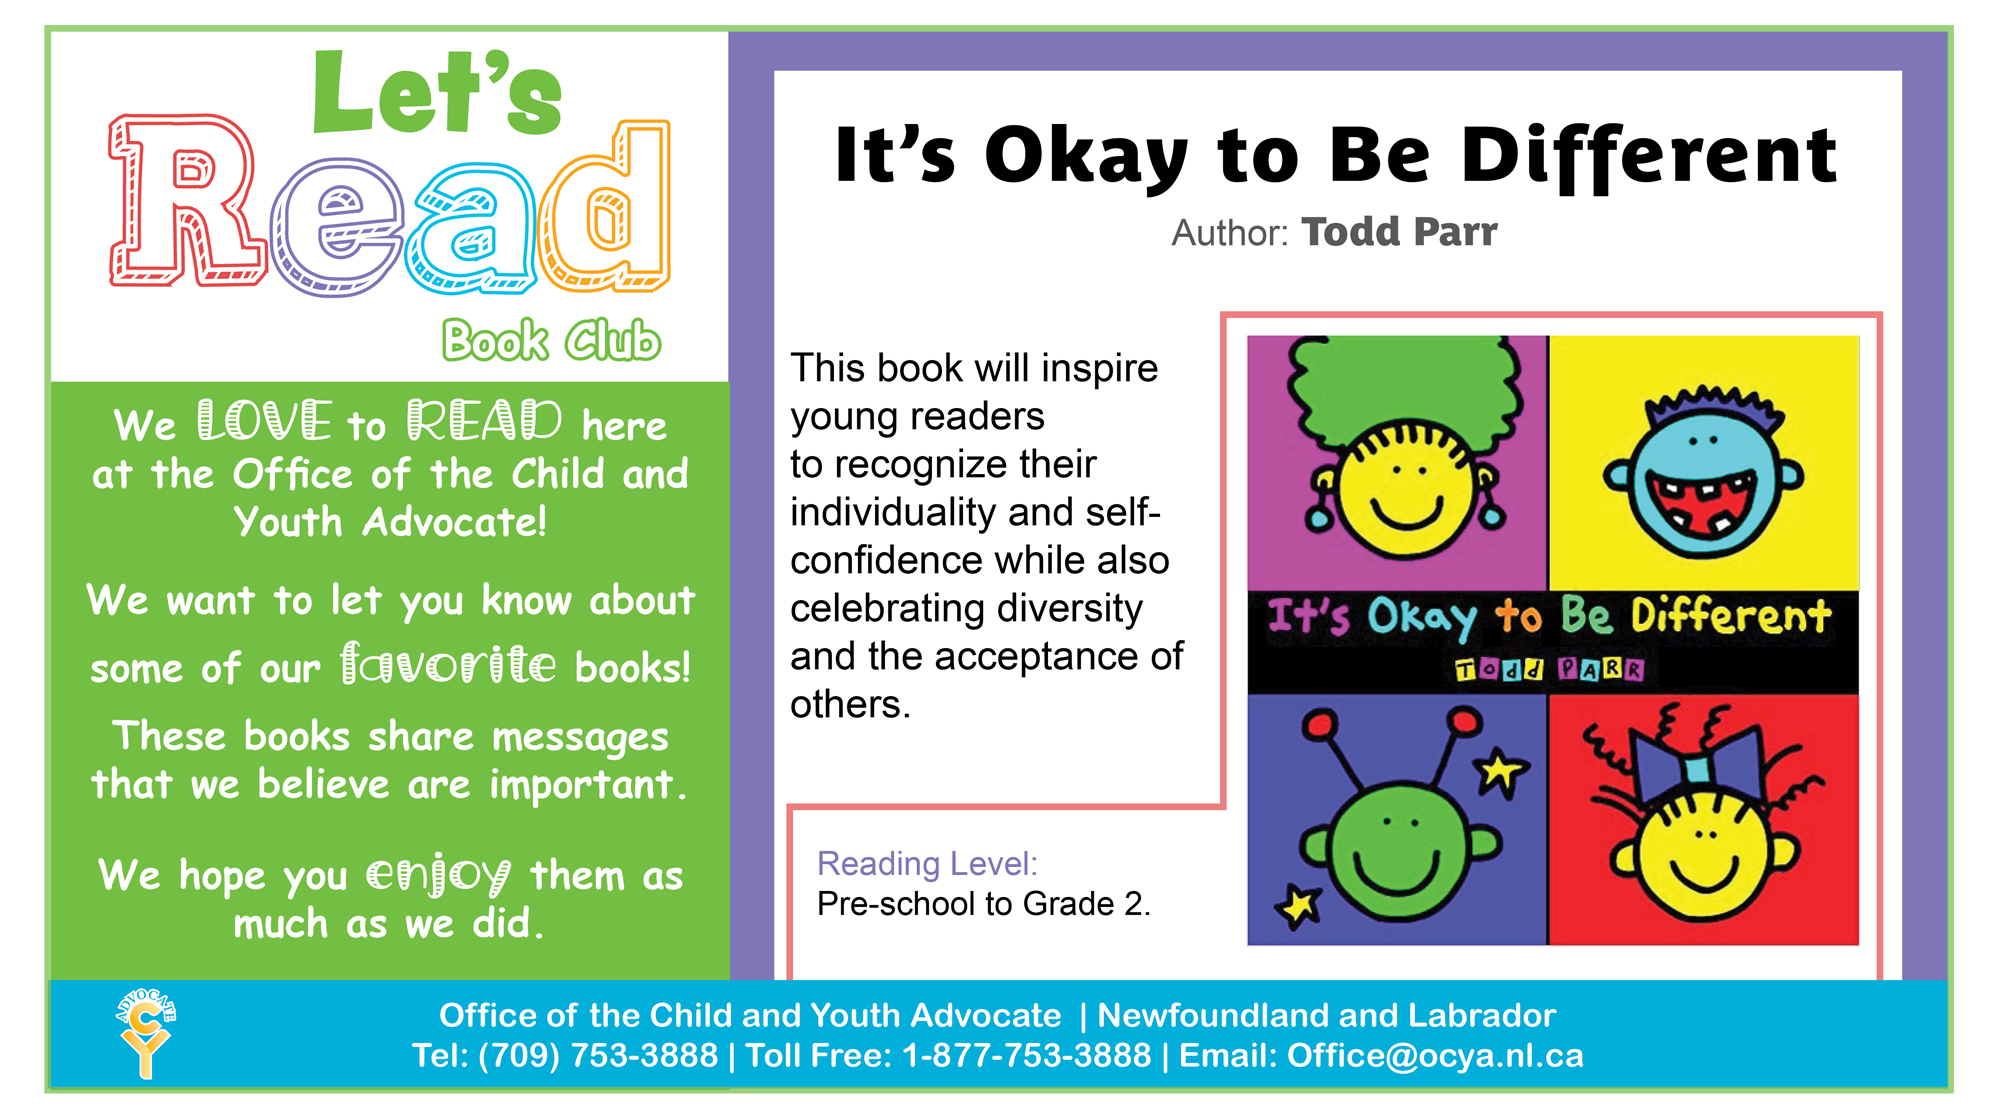 It's Ok To Be Different, by Todd Parr. This book will inspire young readers to recognize their individuality and self-confidence while also celebrating diversity and the acceptance of others. Reading Level: Pre-school to Grade 2.